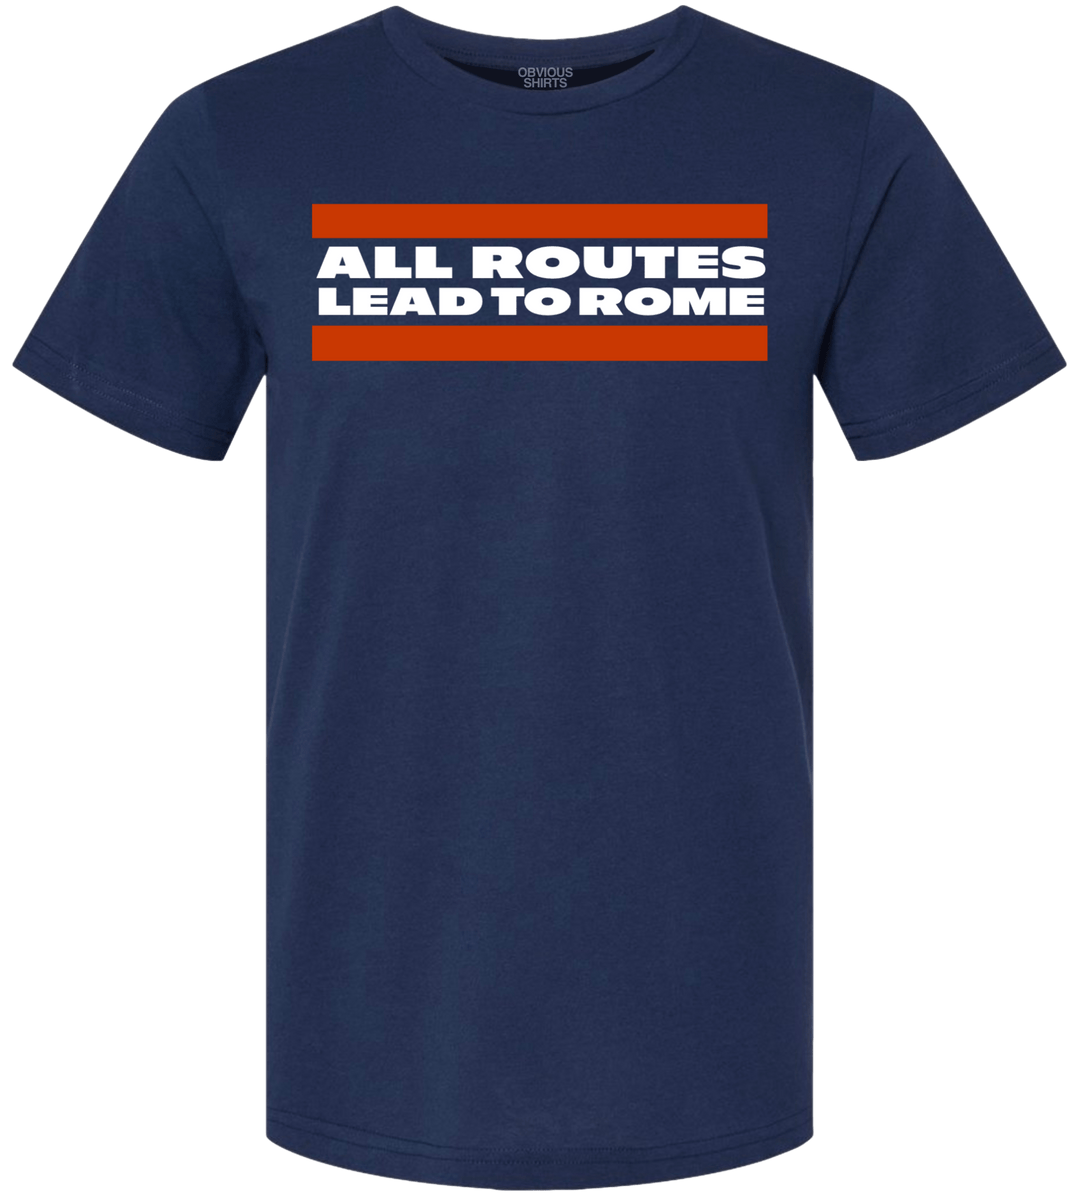 ALL ROUTES LEAD TO ROME. - OBVIOUS SHIRTS